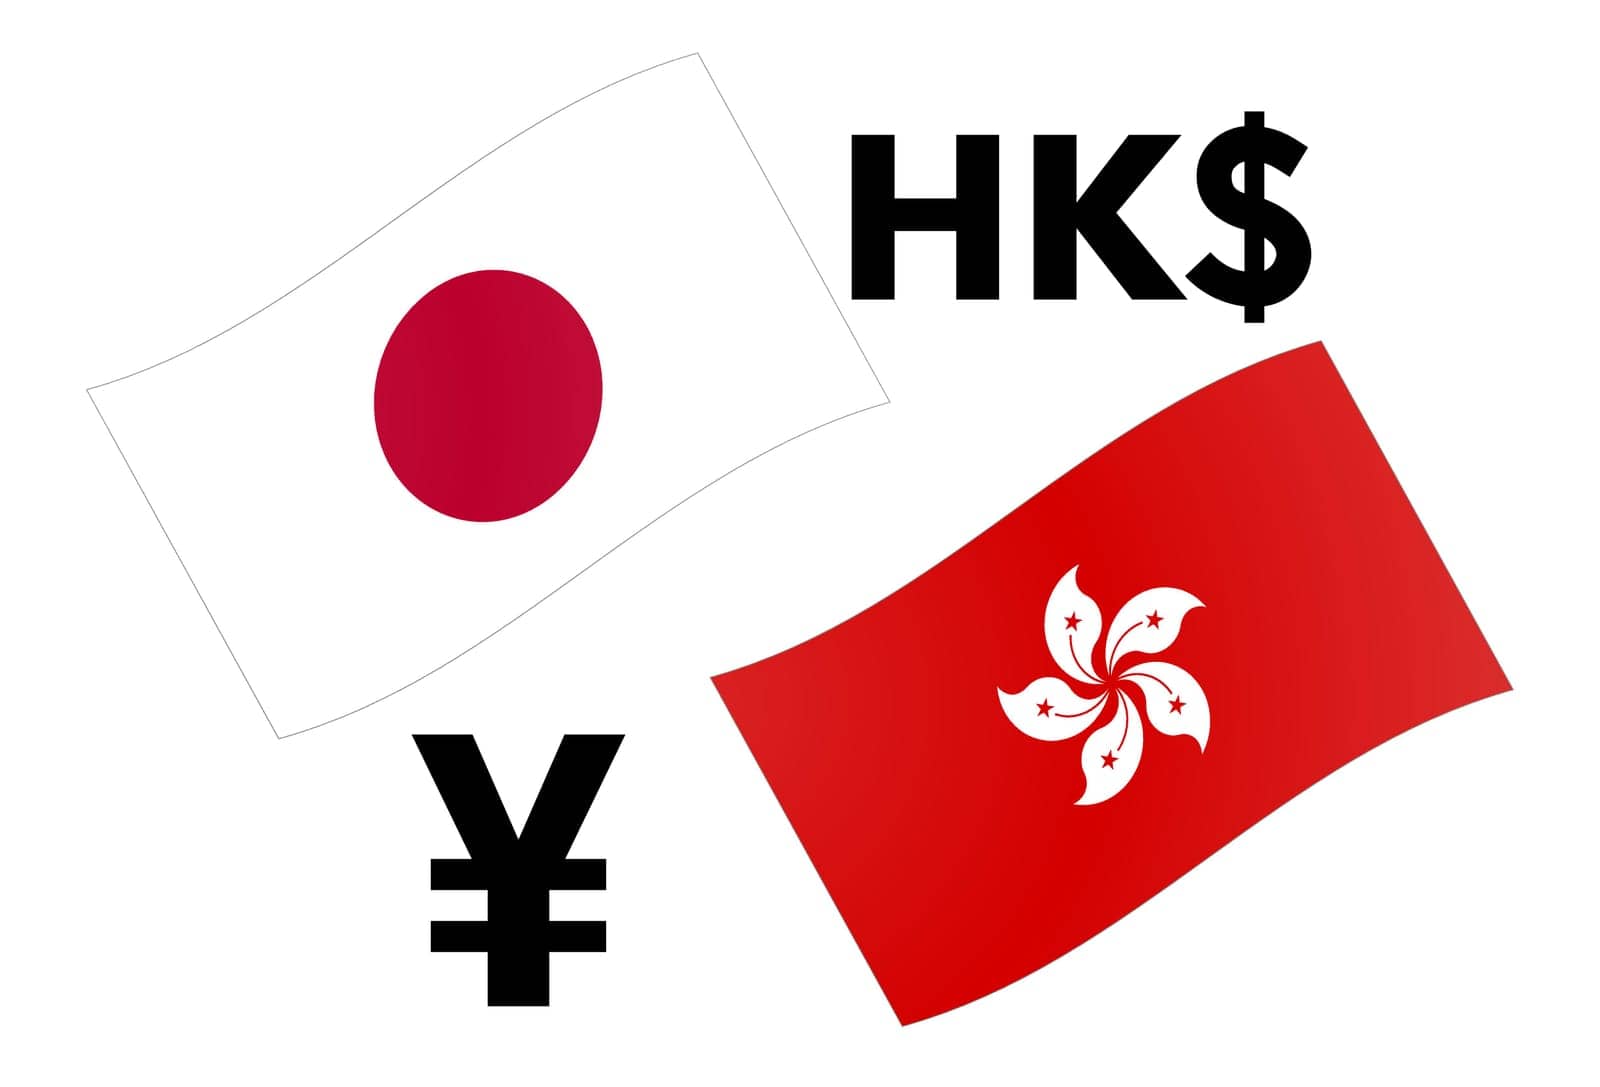 JPYHKD forex currency pair vector illustration. Japanese and Hongkong flag, with Yen and Dollar symbol.